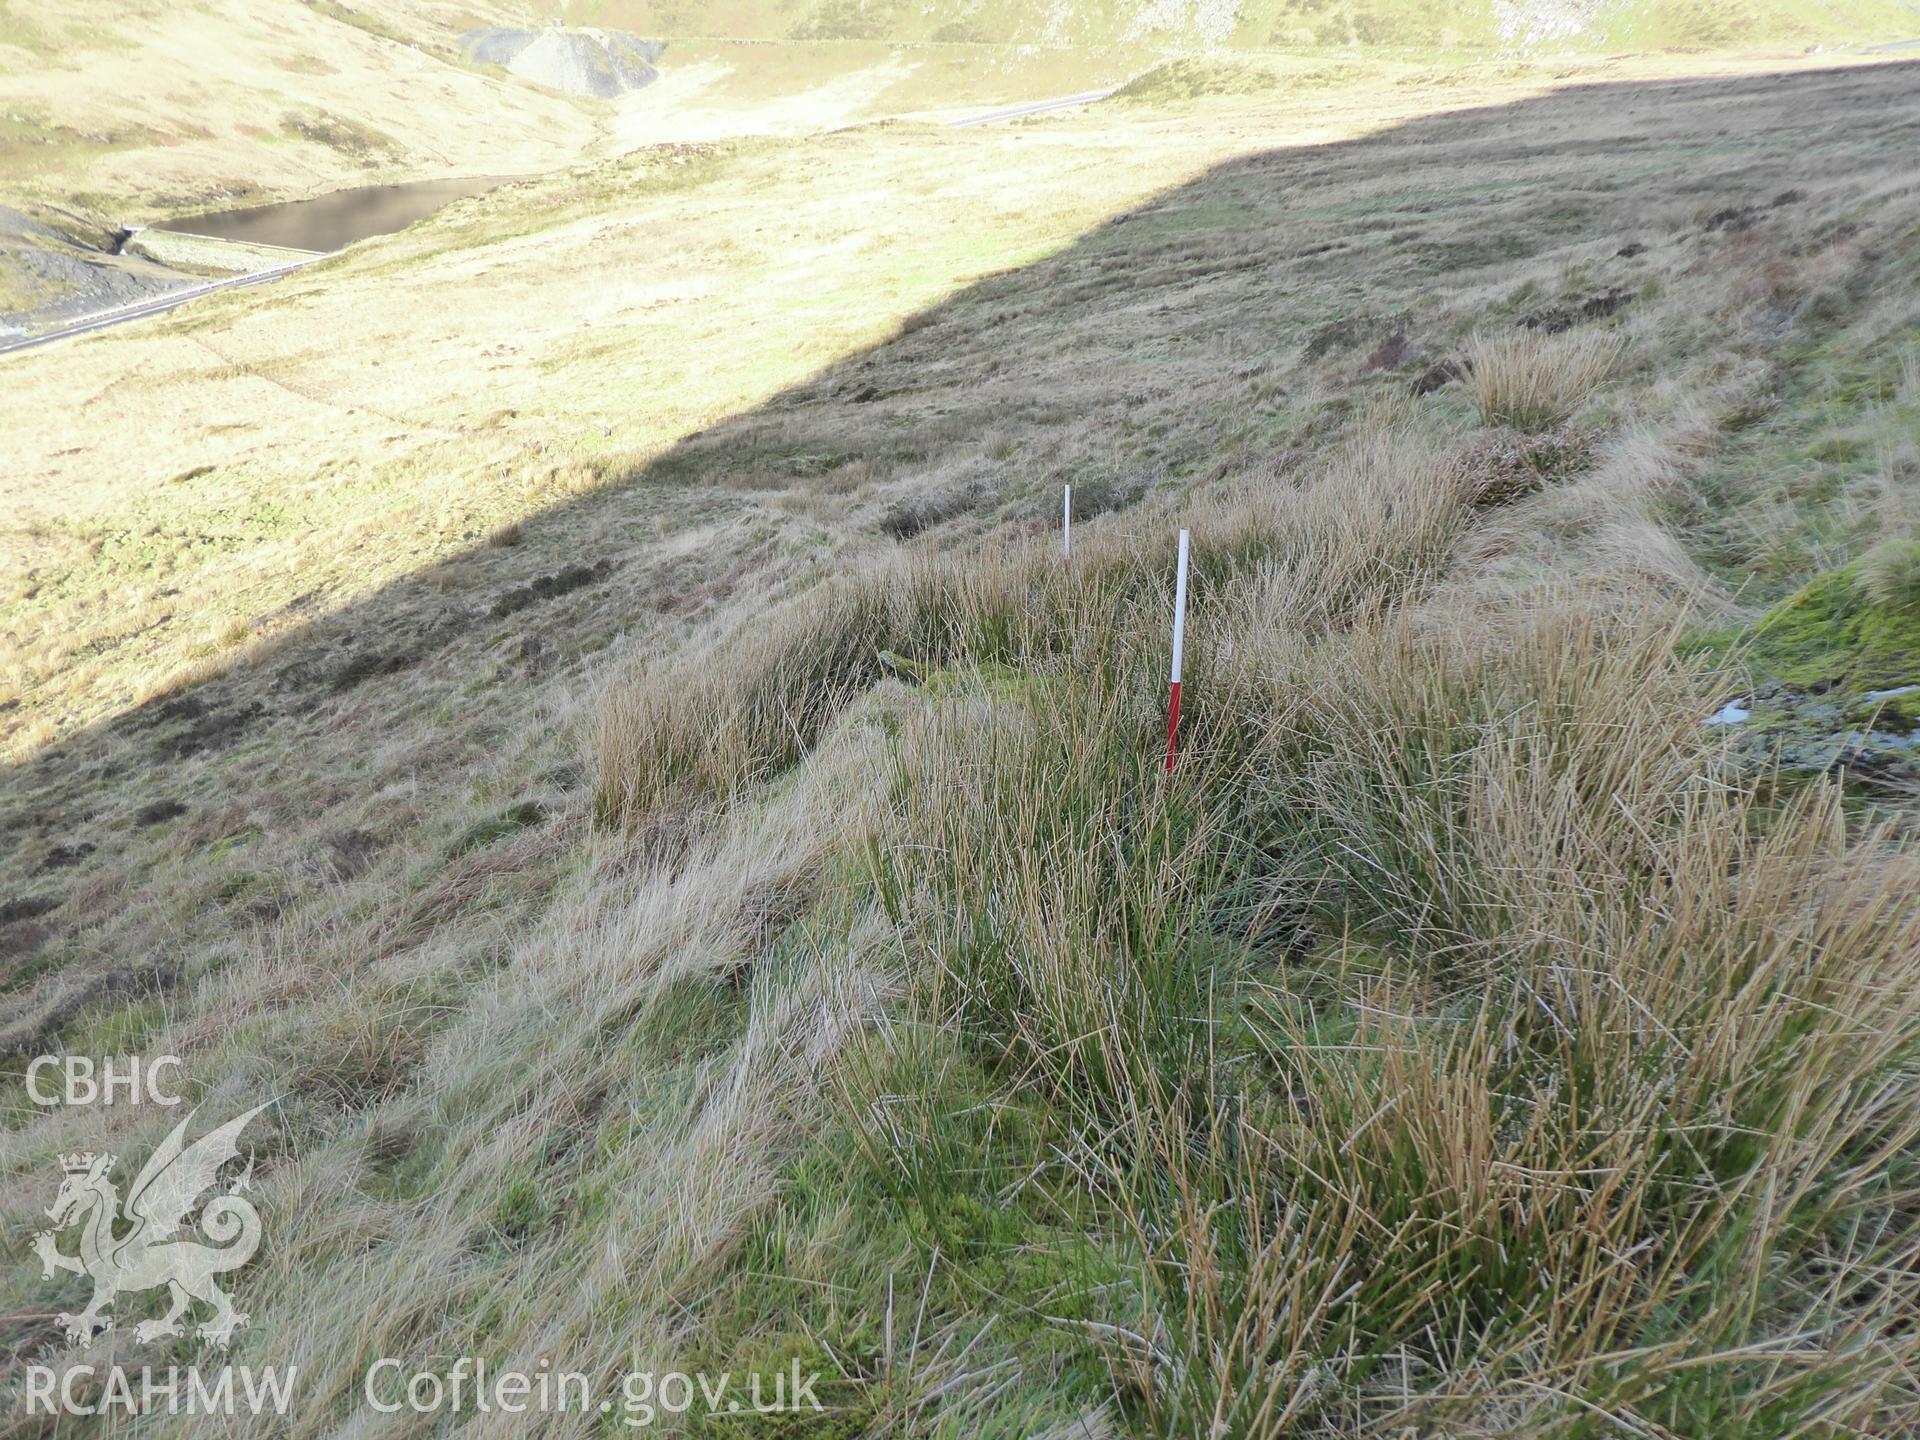 Moel Bowydd drain, photographed on 11th February 2019 as part of archaeological assessment of Antur Stiniog Downhill Cycle Tracks Extension, conducted by I. P. Brooks of Engineering Archaeological Services Ltd.